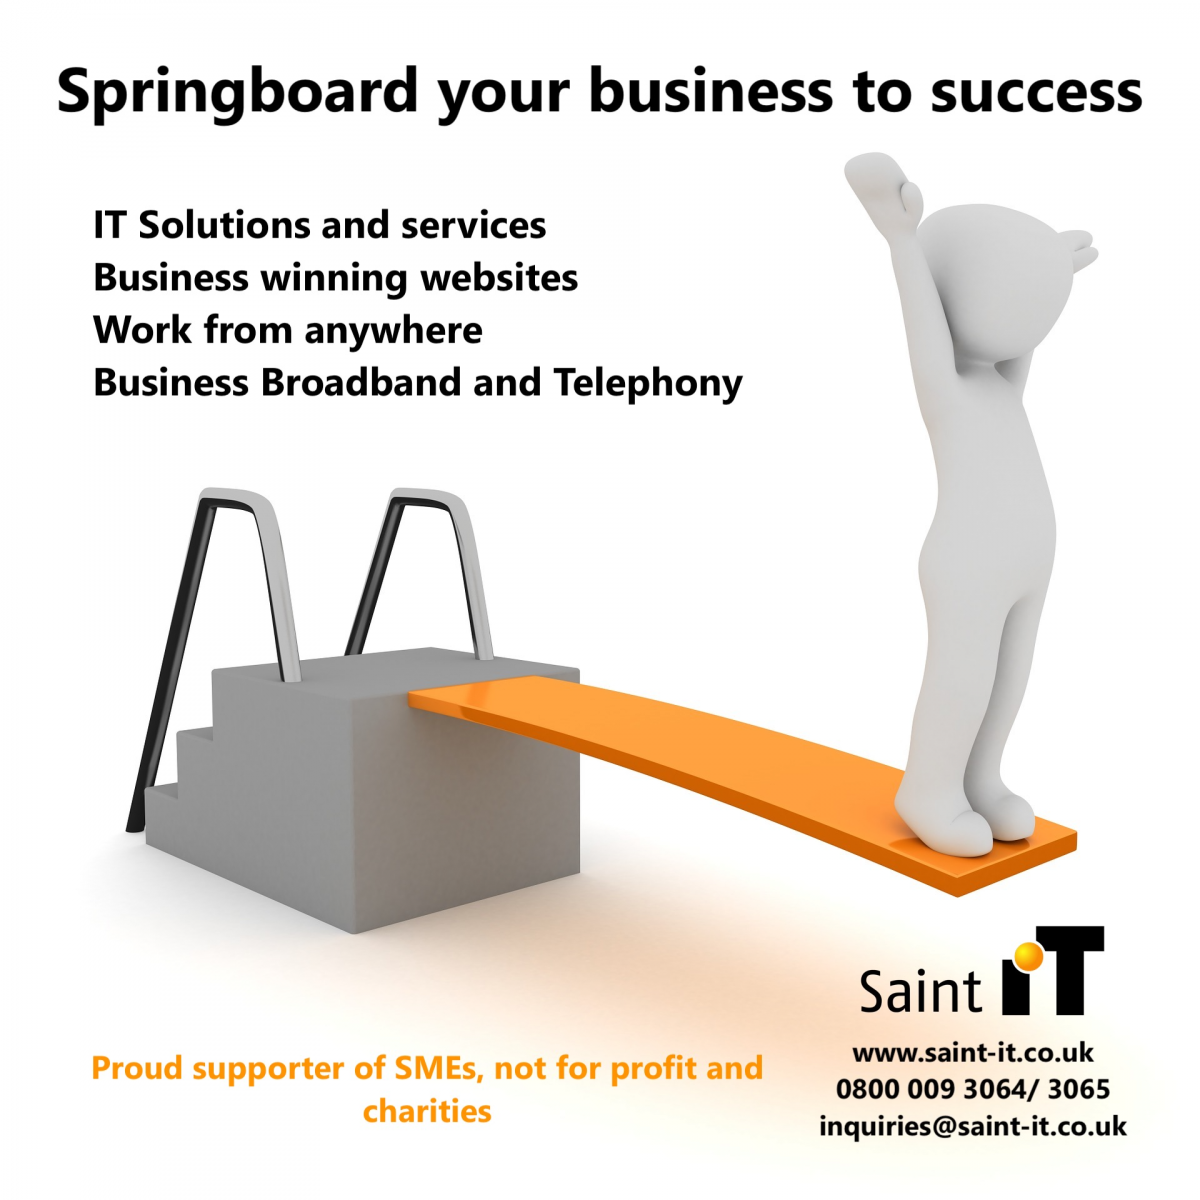 Ready to discuss improving your business IT?